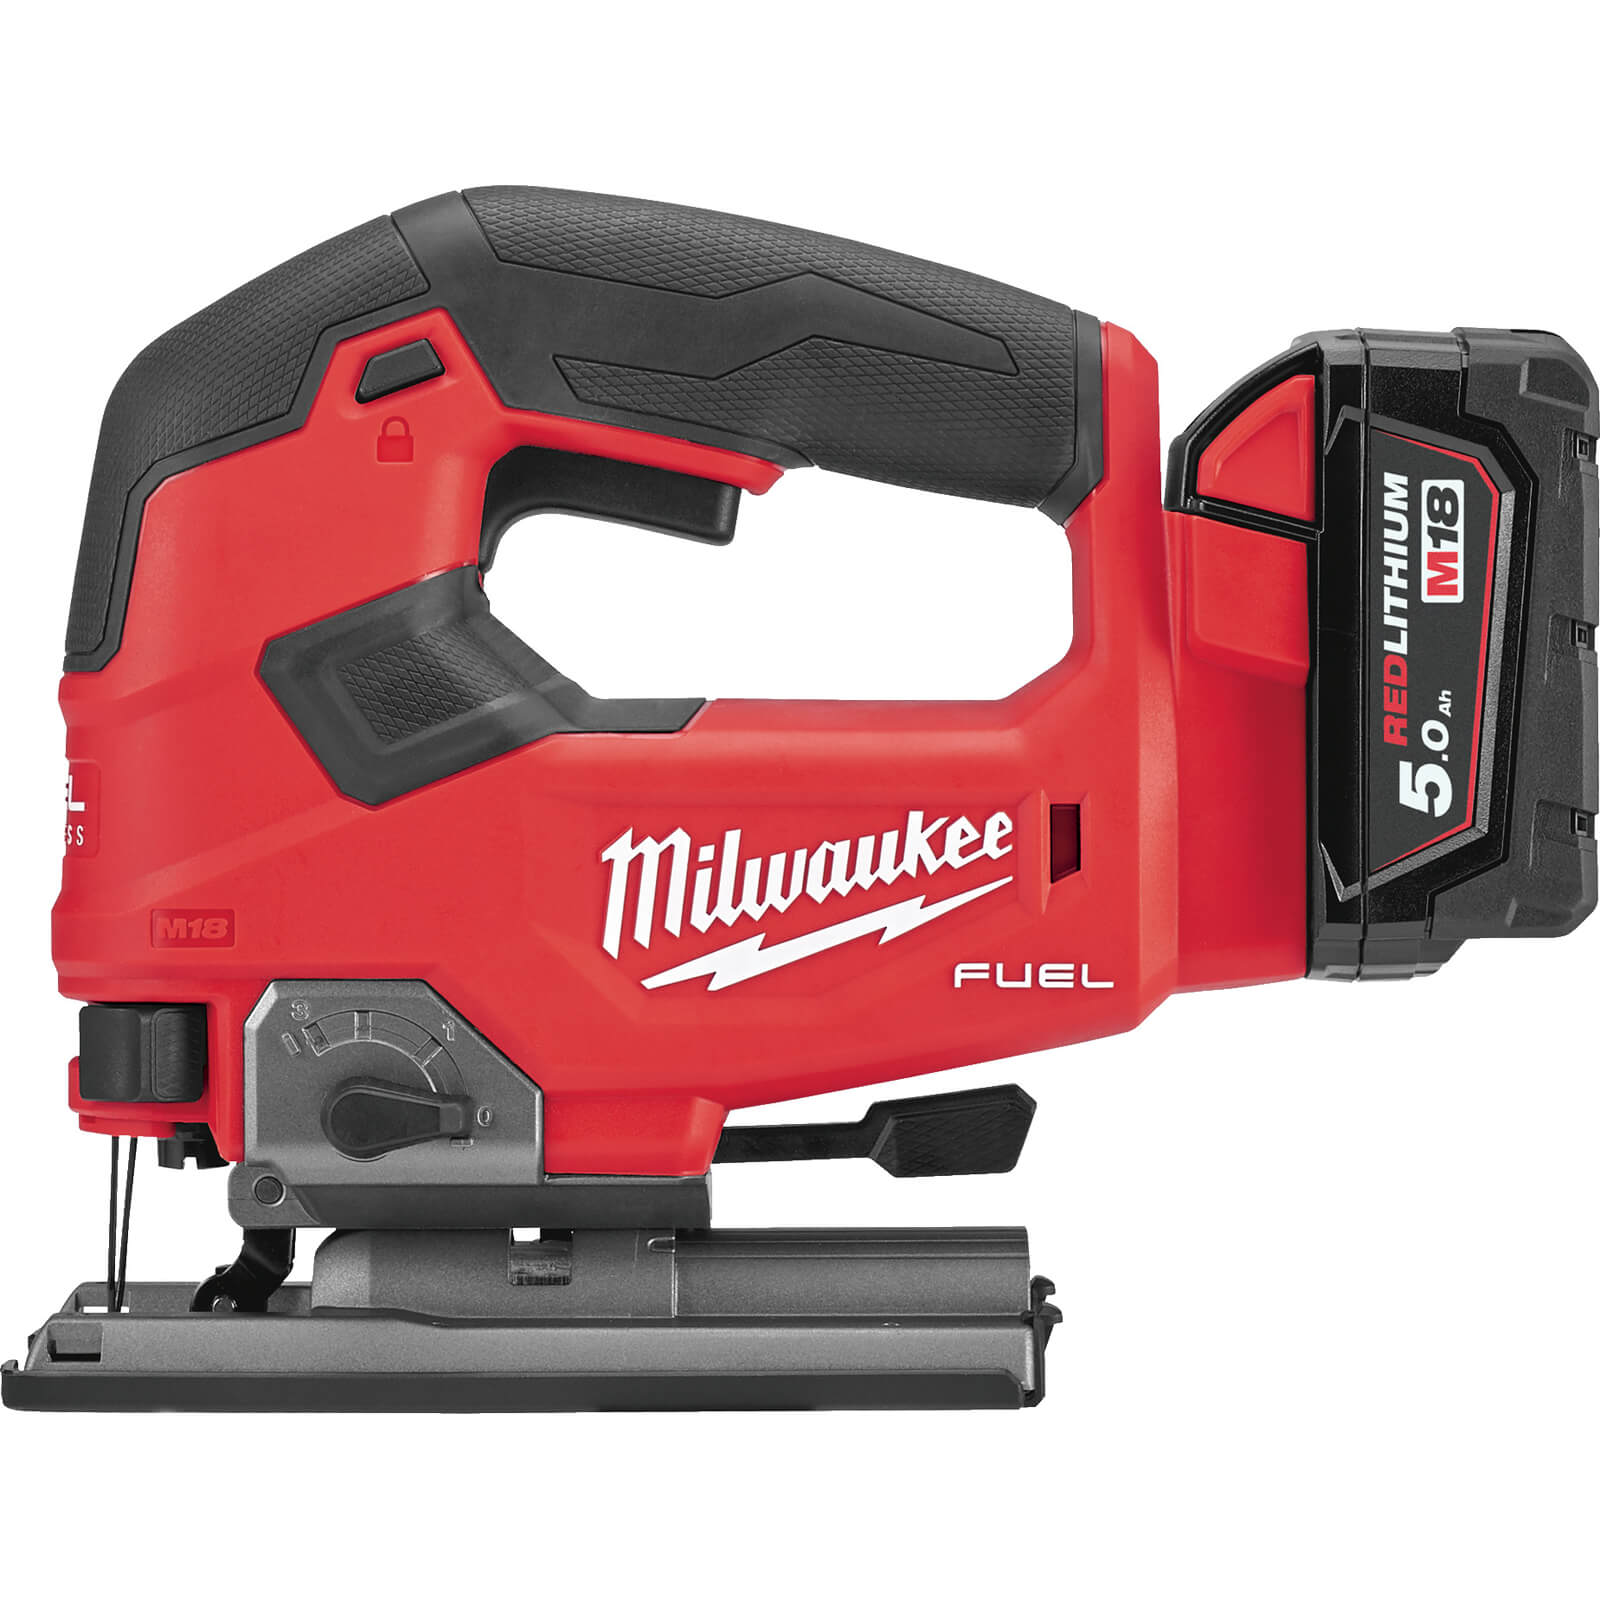 Image of Milwaukee M18 FJS Fuel 18v Cordless Brushless Jigsaw 2 x 5ah Li-ion Charger Case